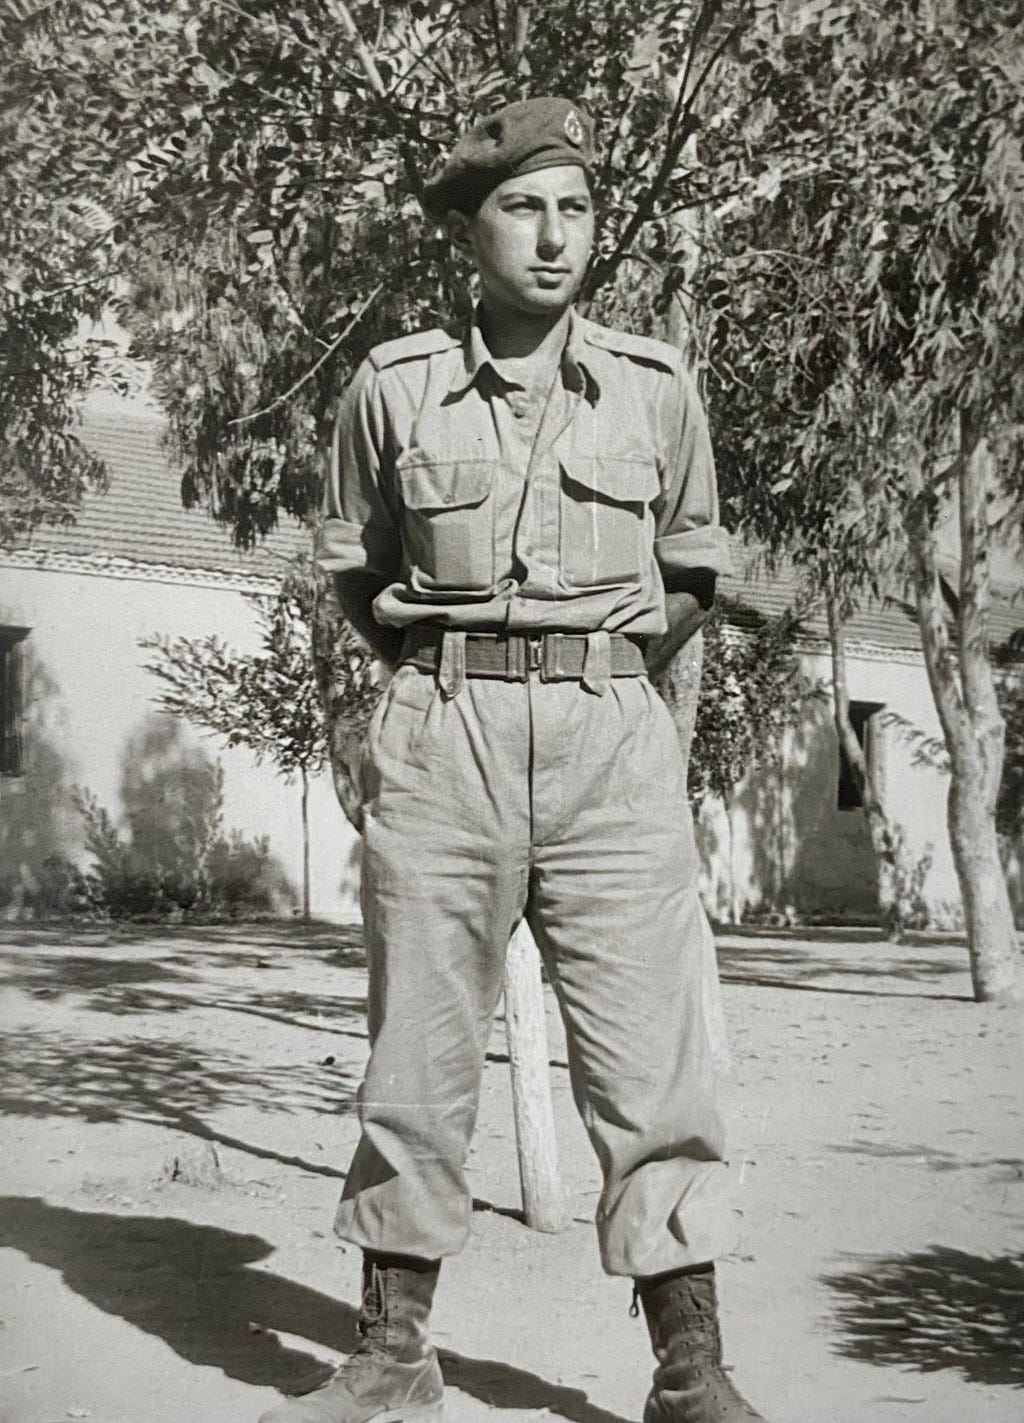 A dark haired man in a military uniform standing with his legs spread, arms behind his back.